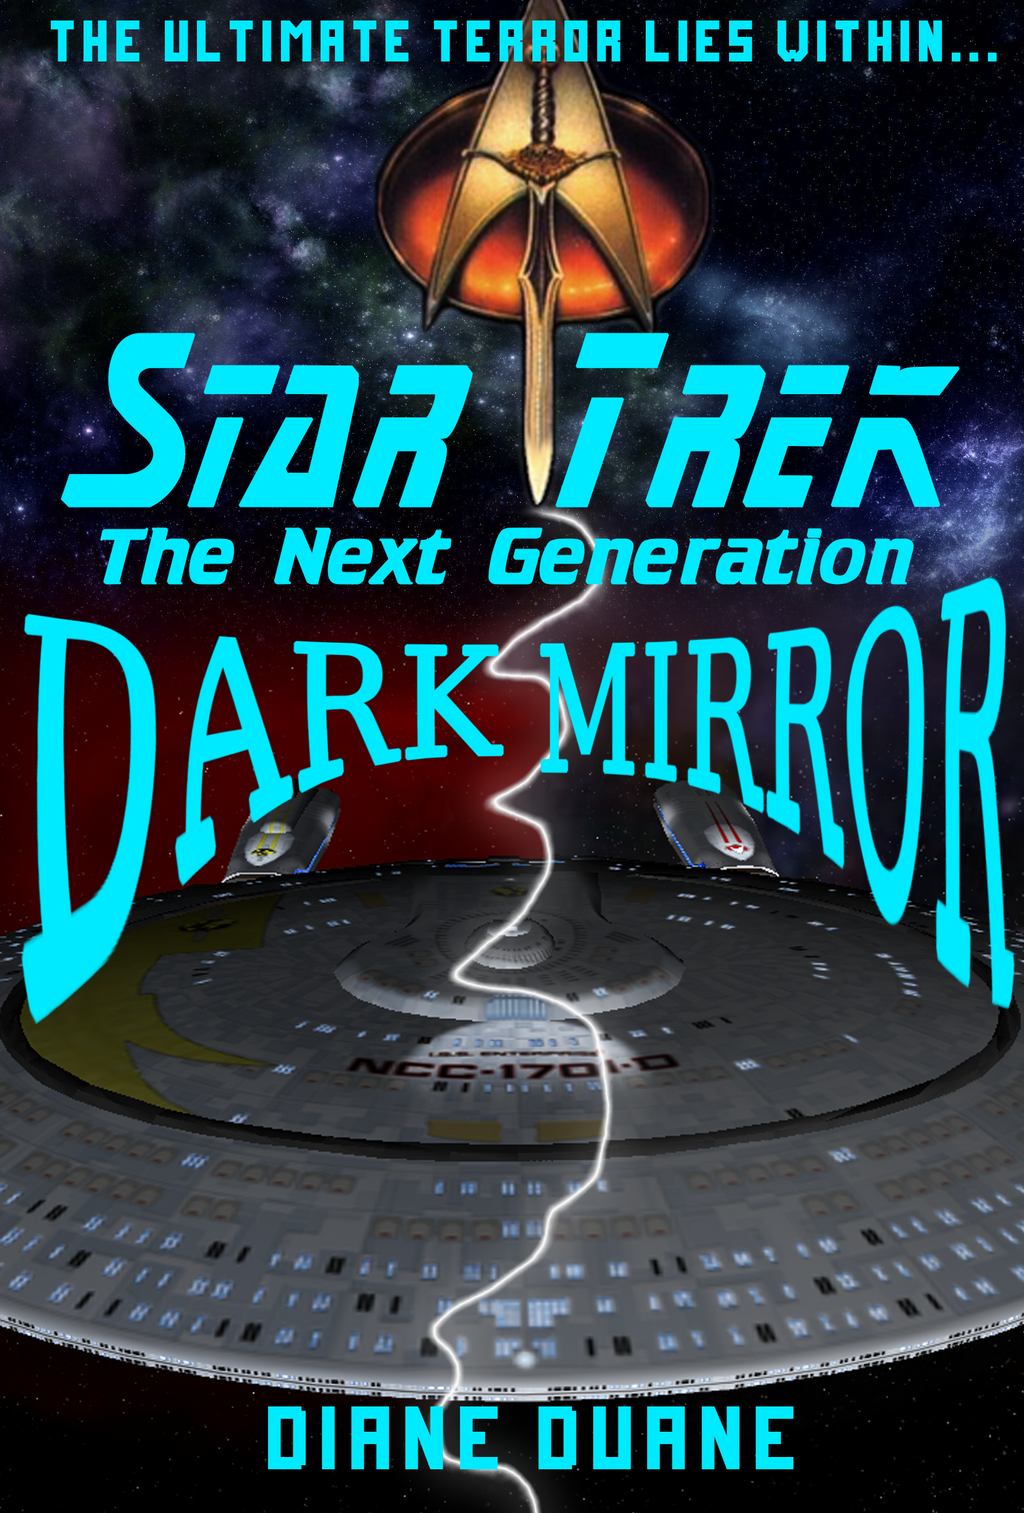 dark_mirror_book_cover_by_darthassassin-d70h84i.png